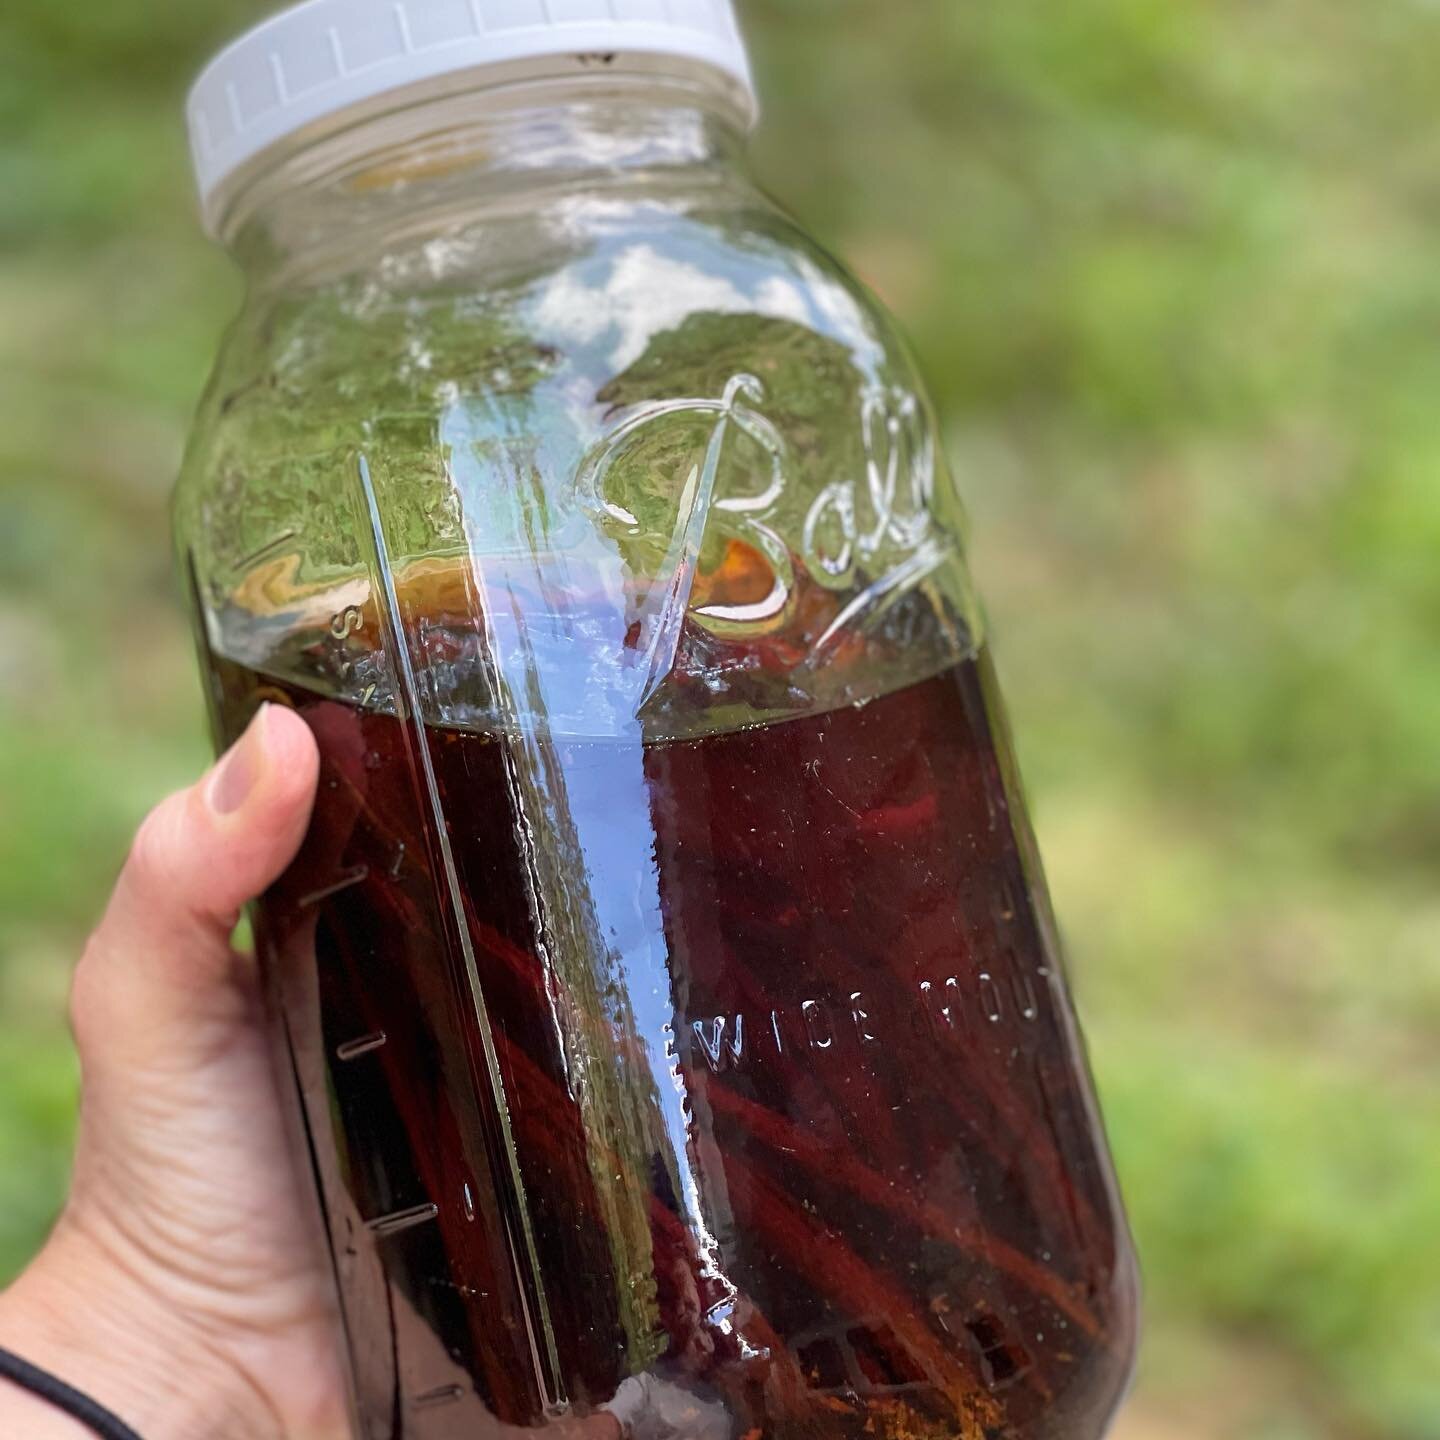 Another concoction - Just for fun!! 
.
Bourbon Vanilla Extract
.
Vanilla extract can be so expensive! So I decided to give this a go and try my own hand at making it. I went big with this batch in case I want to share! 😘
.
20-25 Whole Vanilla Beans 